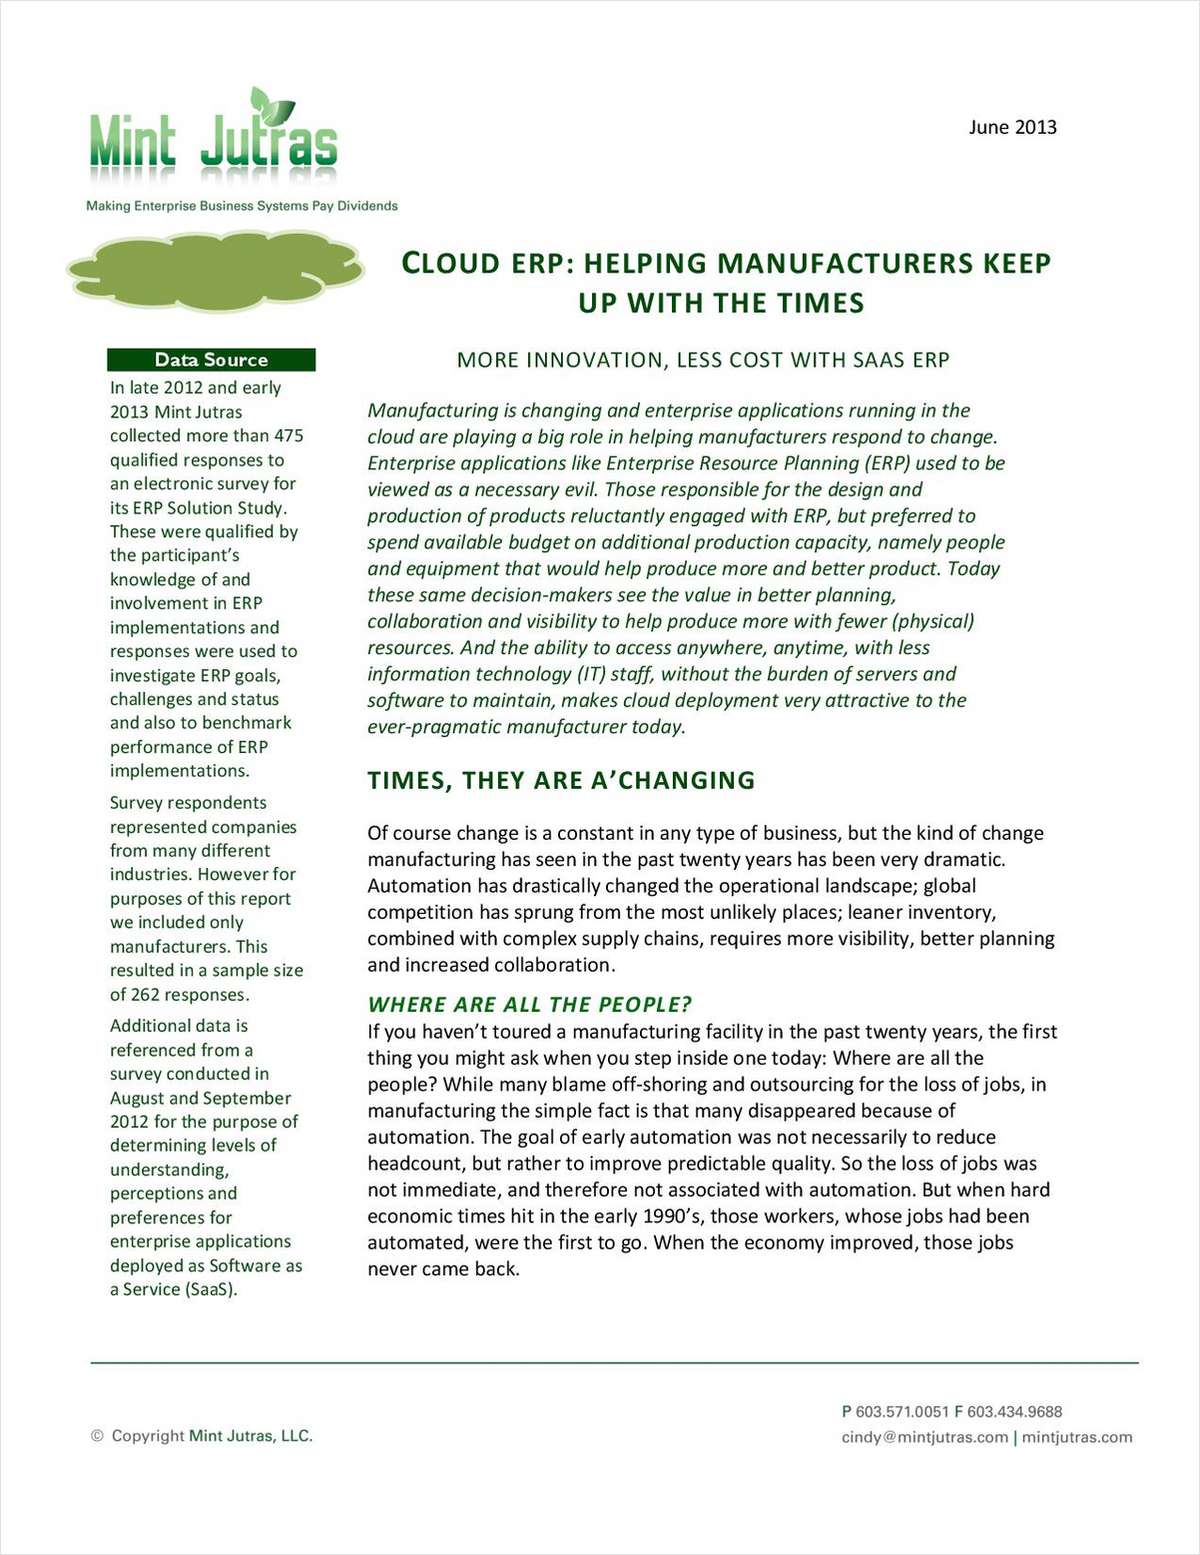 Cloud ERP: Helping Manufacturers Keep Up With The Times